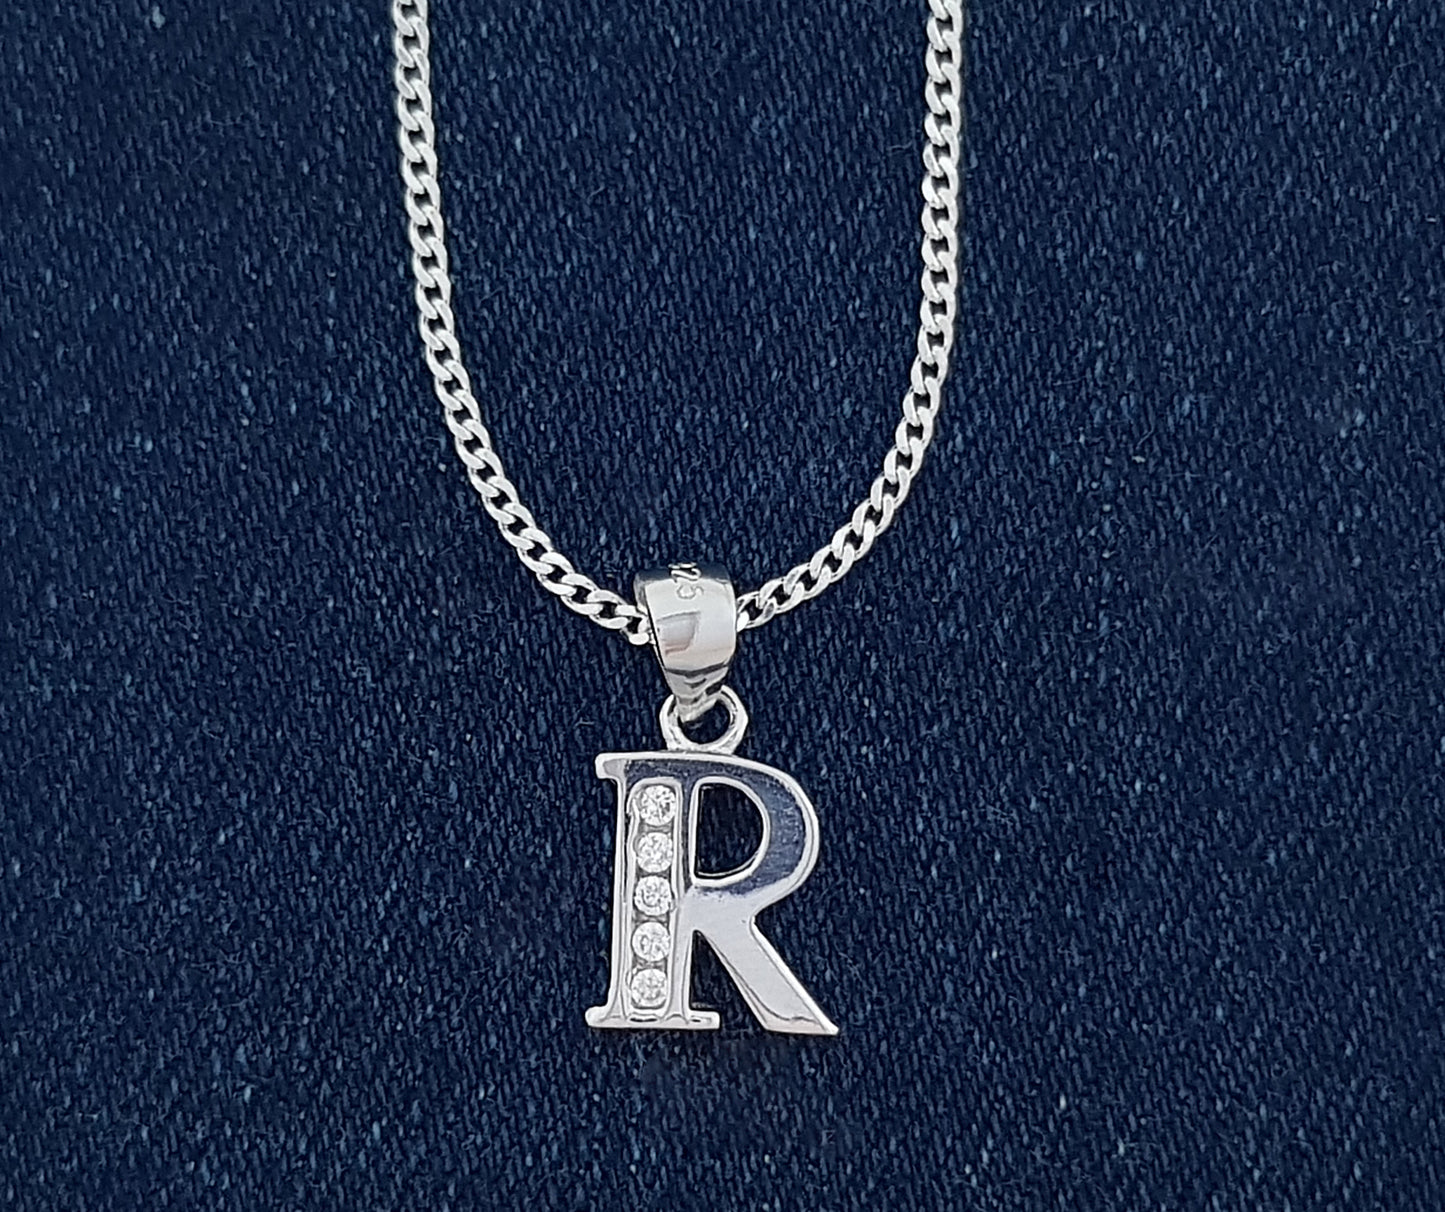 Sterling Silver Initial with Cubic Zirconia Stones- "R" Initial or Letter